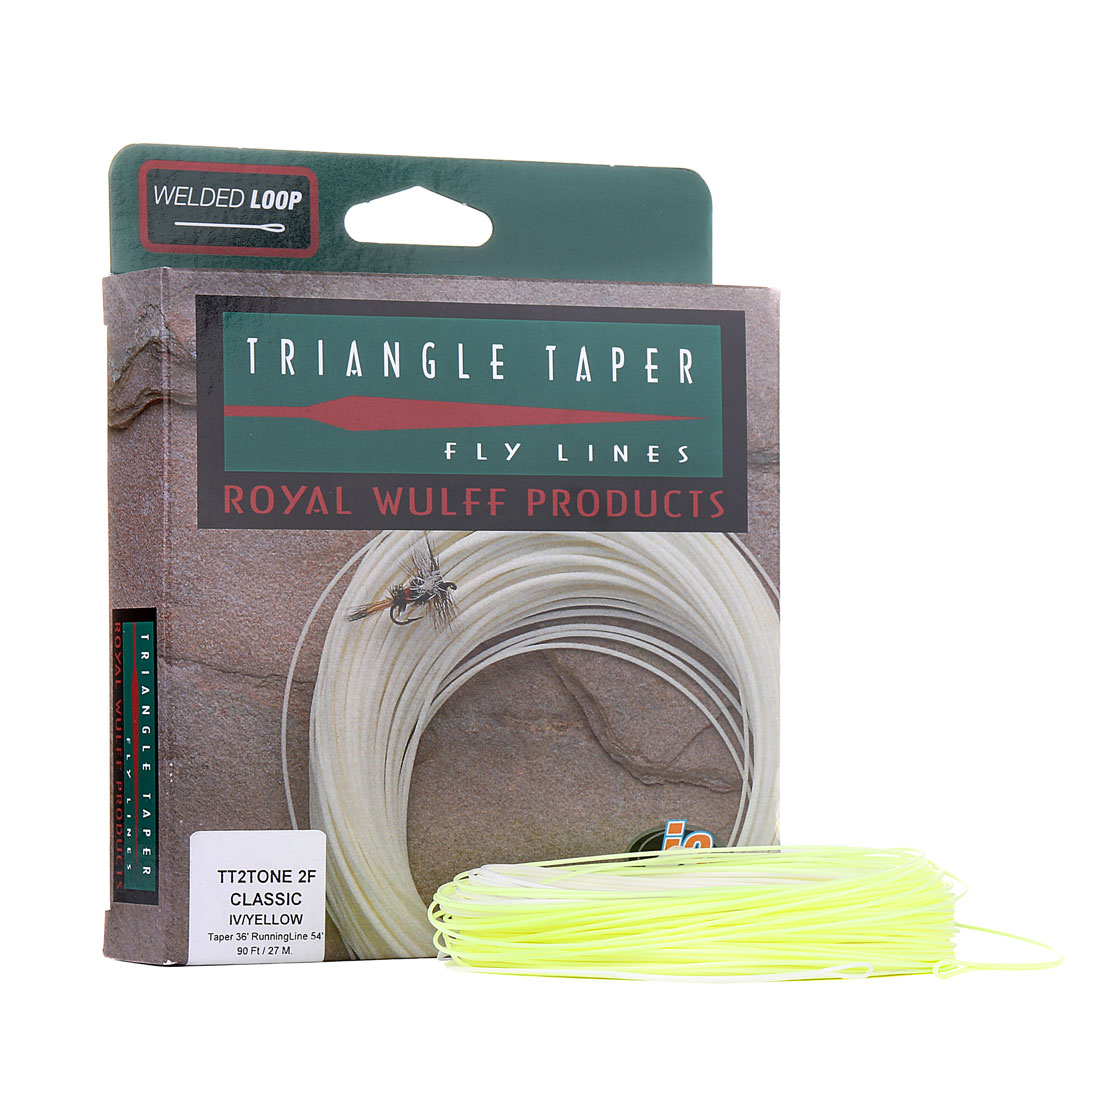 Lee Wulff Triangle Taper 2-Tone Classic Fly Line, WF - Floating, Single- handed, Fly Lines